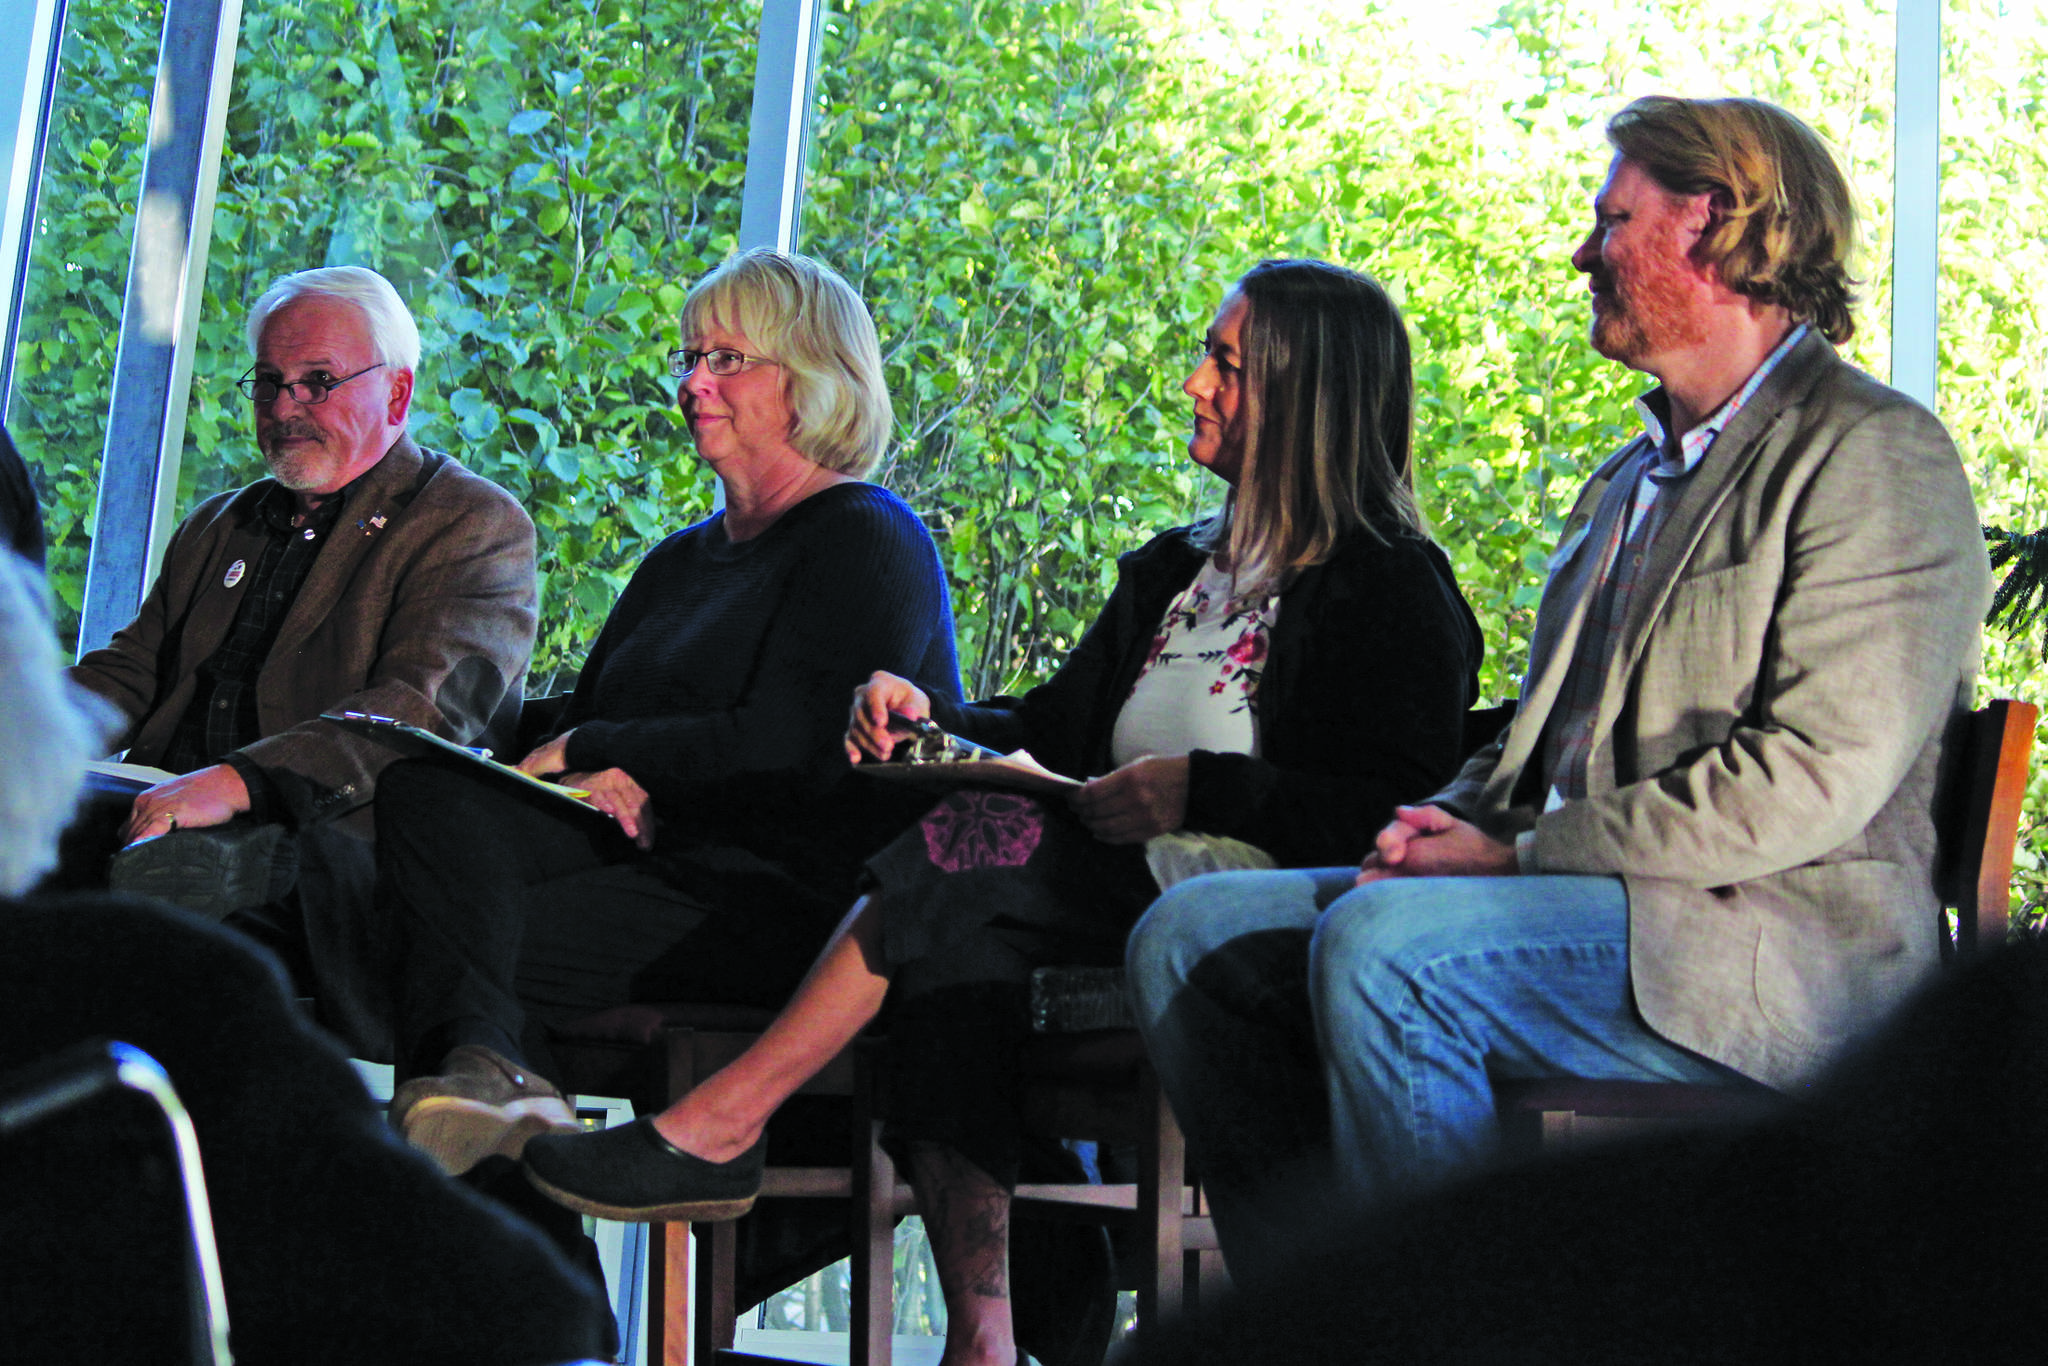 From left to right: Candidates for Homer City Council Tom Stroozas, Shelly Erickson, Storm Hansen-Cavasos and Joey Evensen participate in a candidate forum Wednesday, Sept. 25, 2019 at the Homer Public Library in Homer, Alaska. (Photo by Megan Pacer/Homer News)